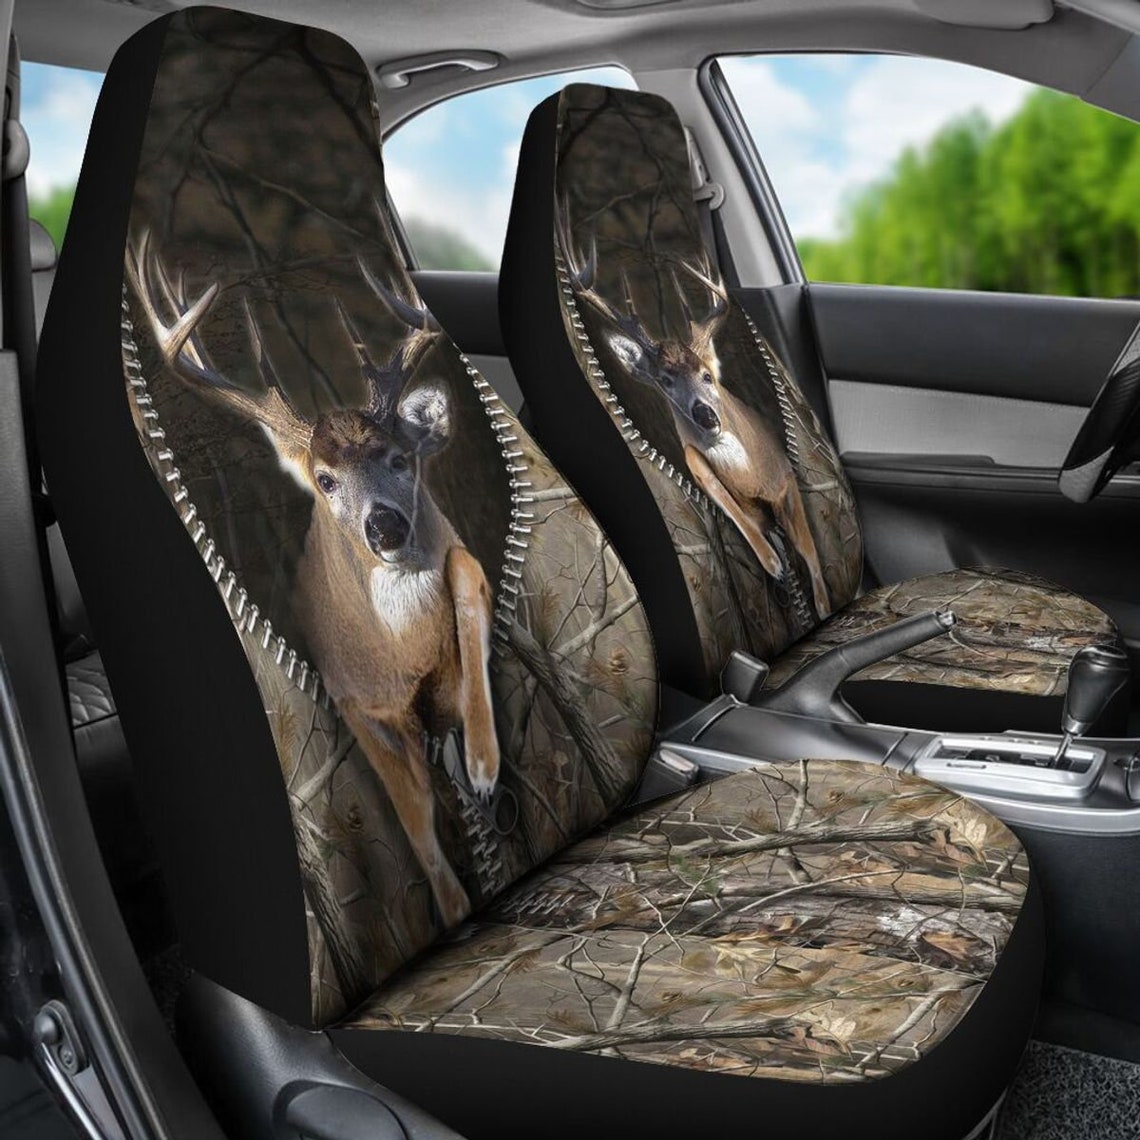 3D All Over Printed Deer Hunting Zipper Camo Car Seat Covers/ Front Carseat Cover With Deer Hunting